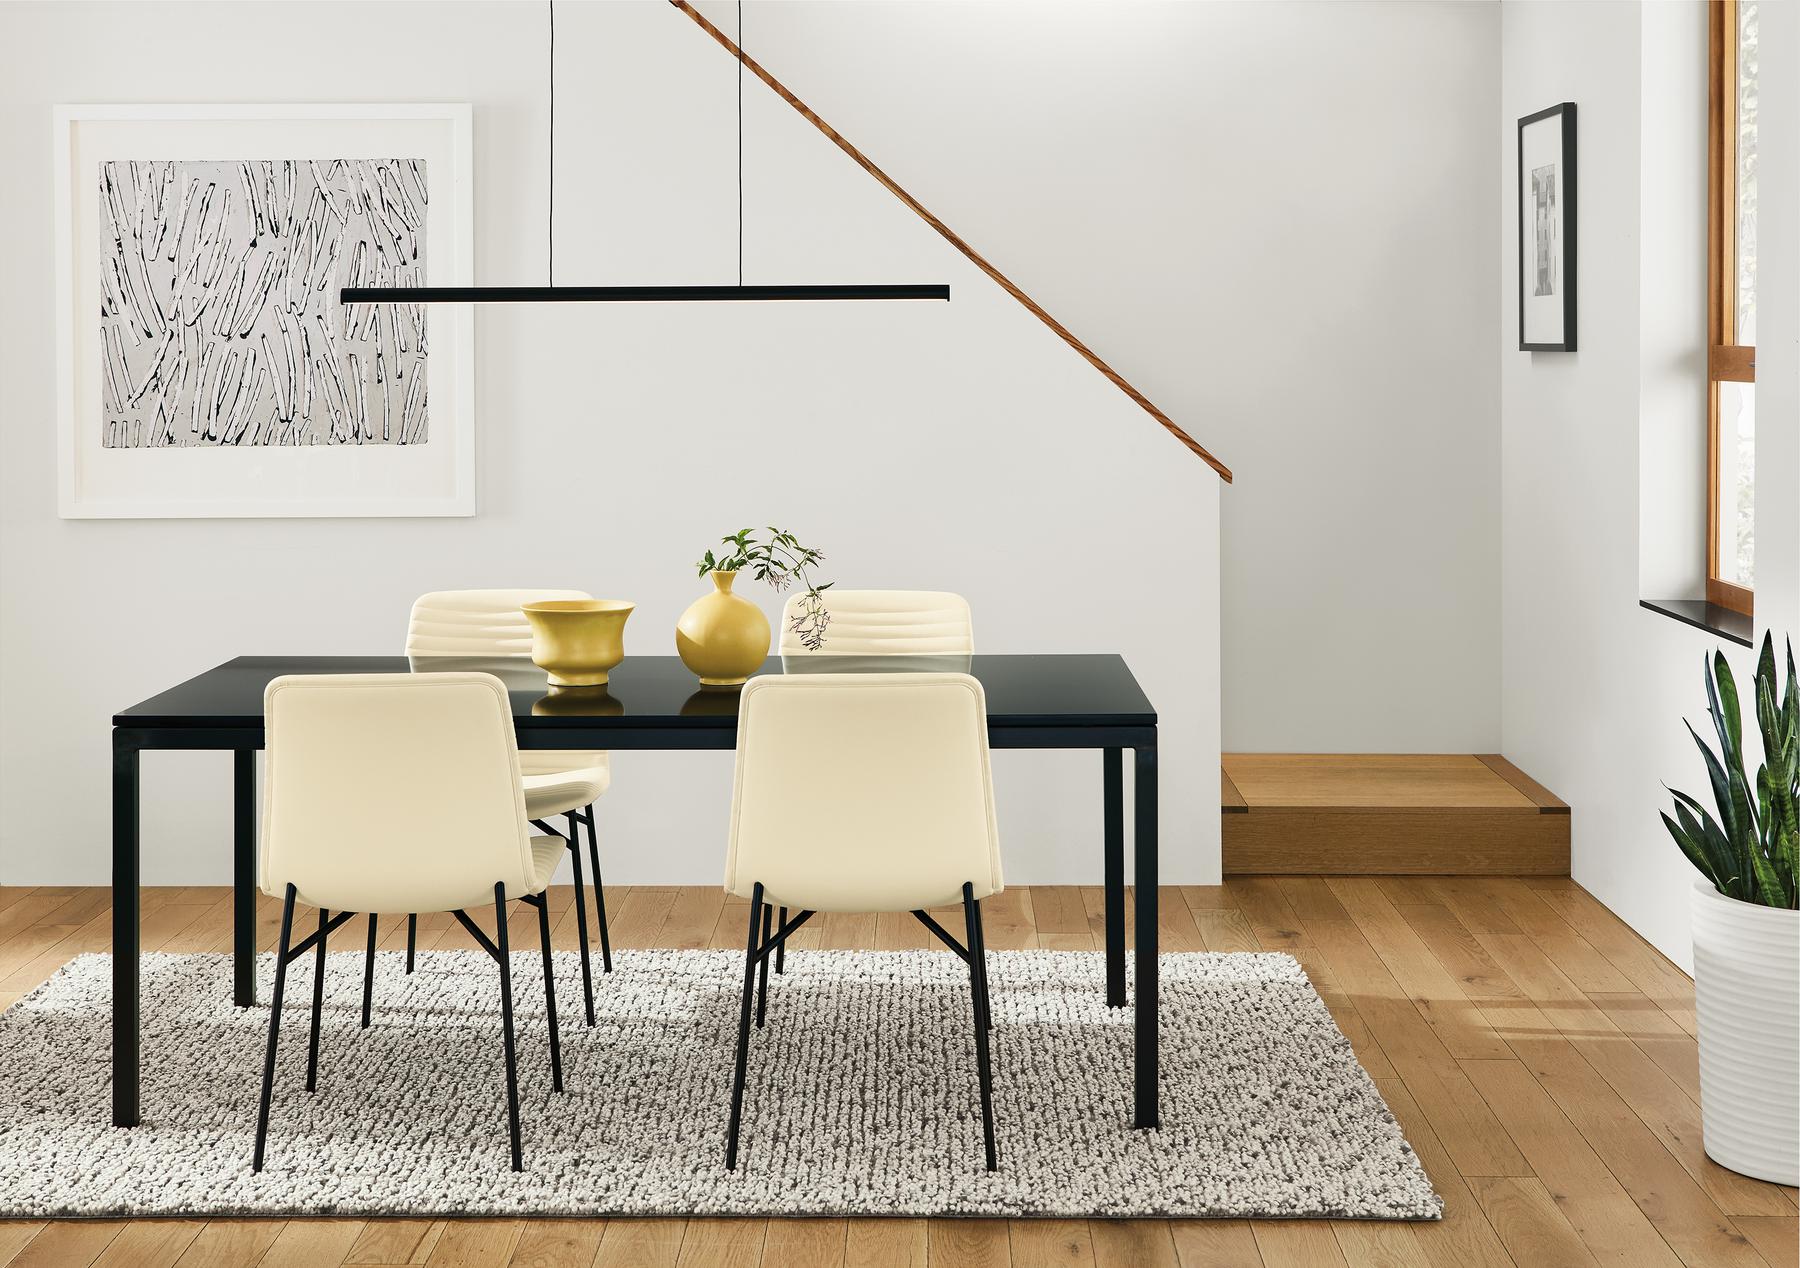 Parsons black table in modern dining room.